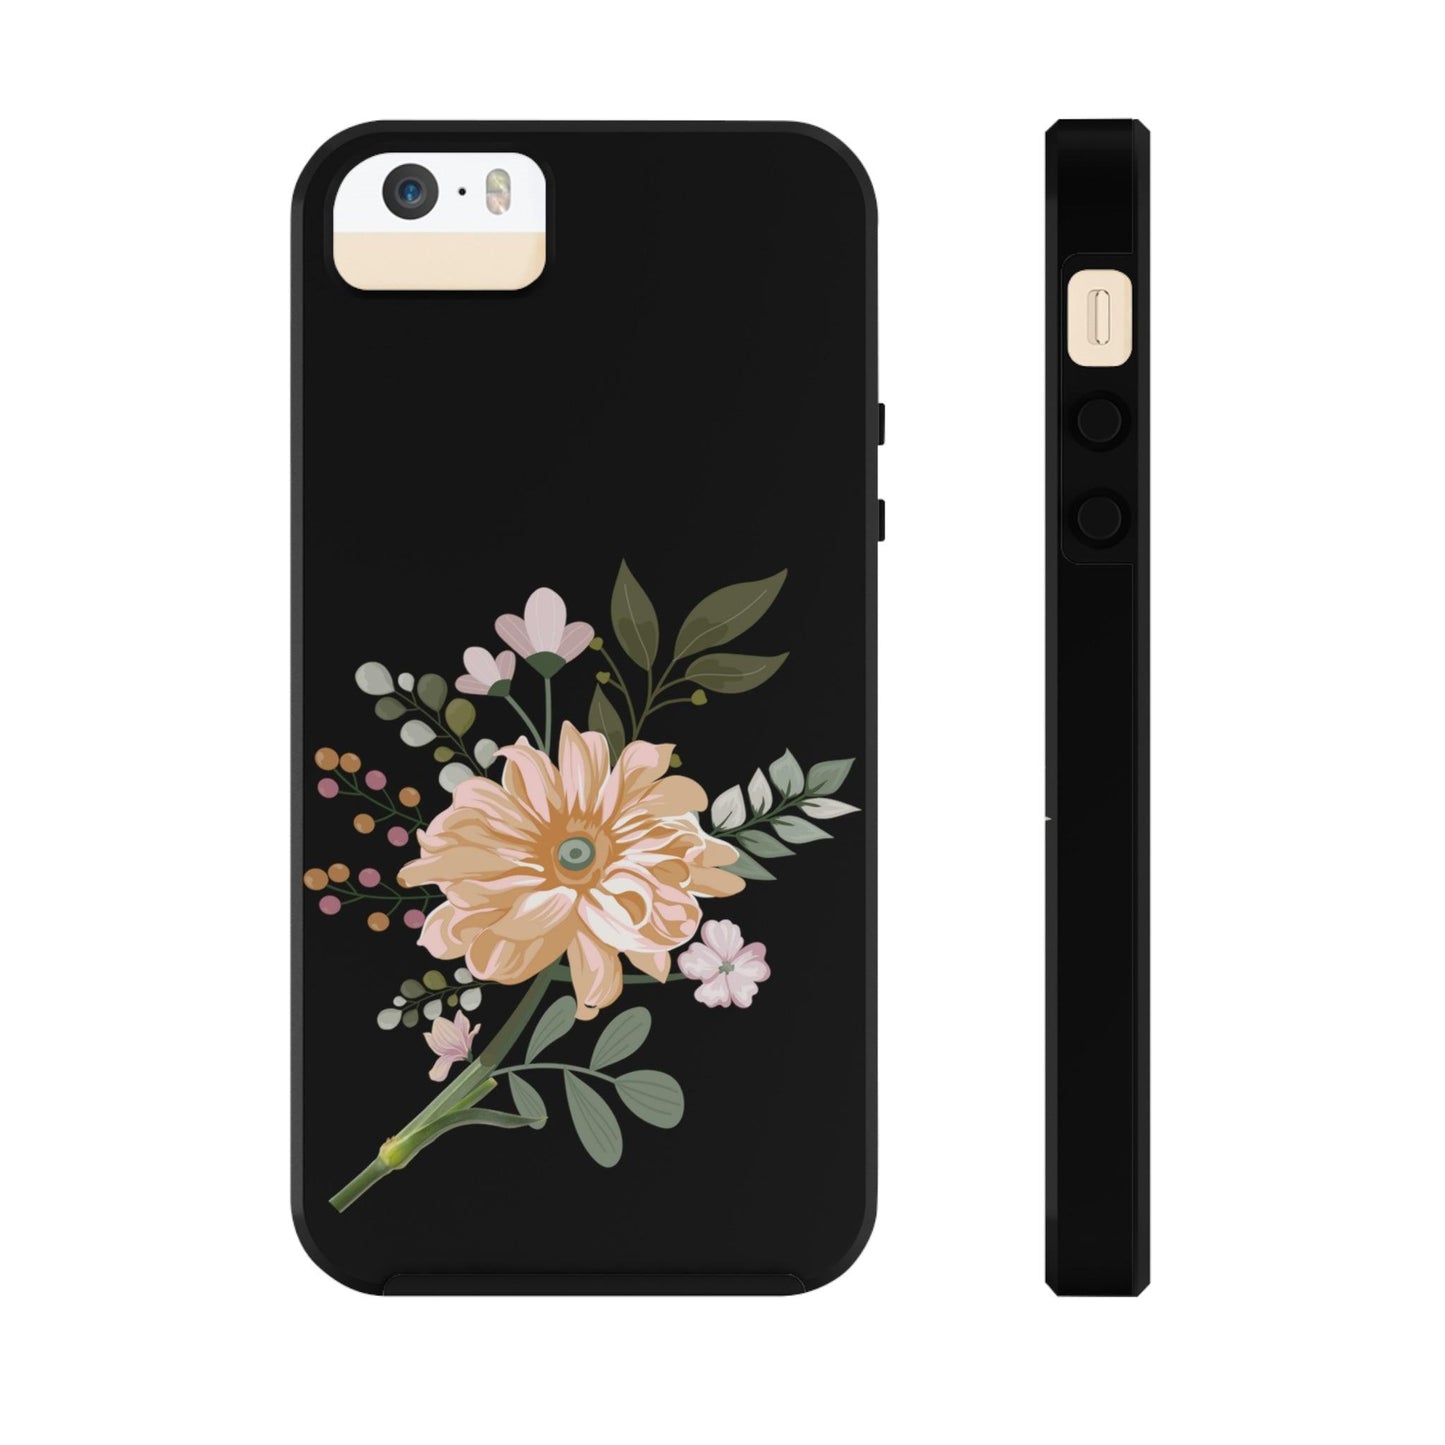 Floral Phone case, Tough Phone Cases, Mom Phone Case fit for iPhone 14 Pro, 13, 12, 11 Pro Max, Xr, Xs, 8+, 7, And Samsung S6